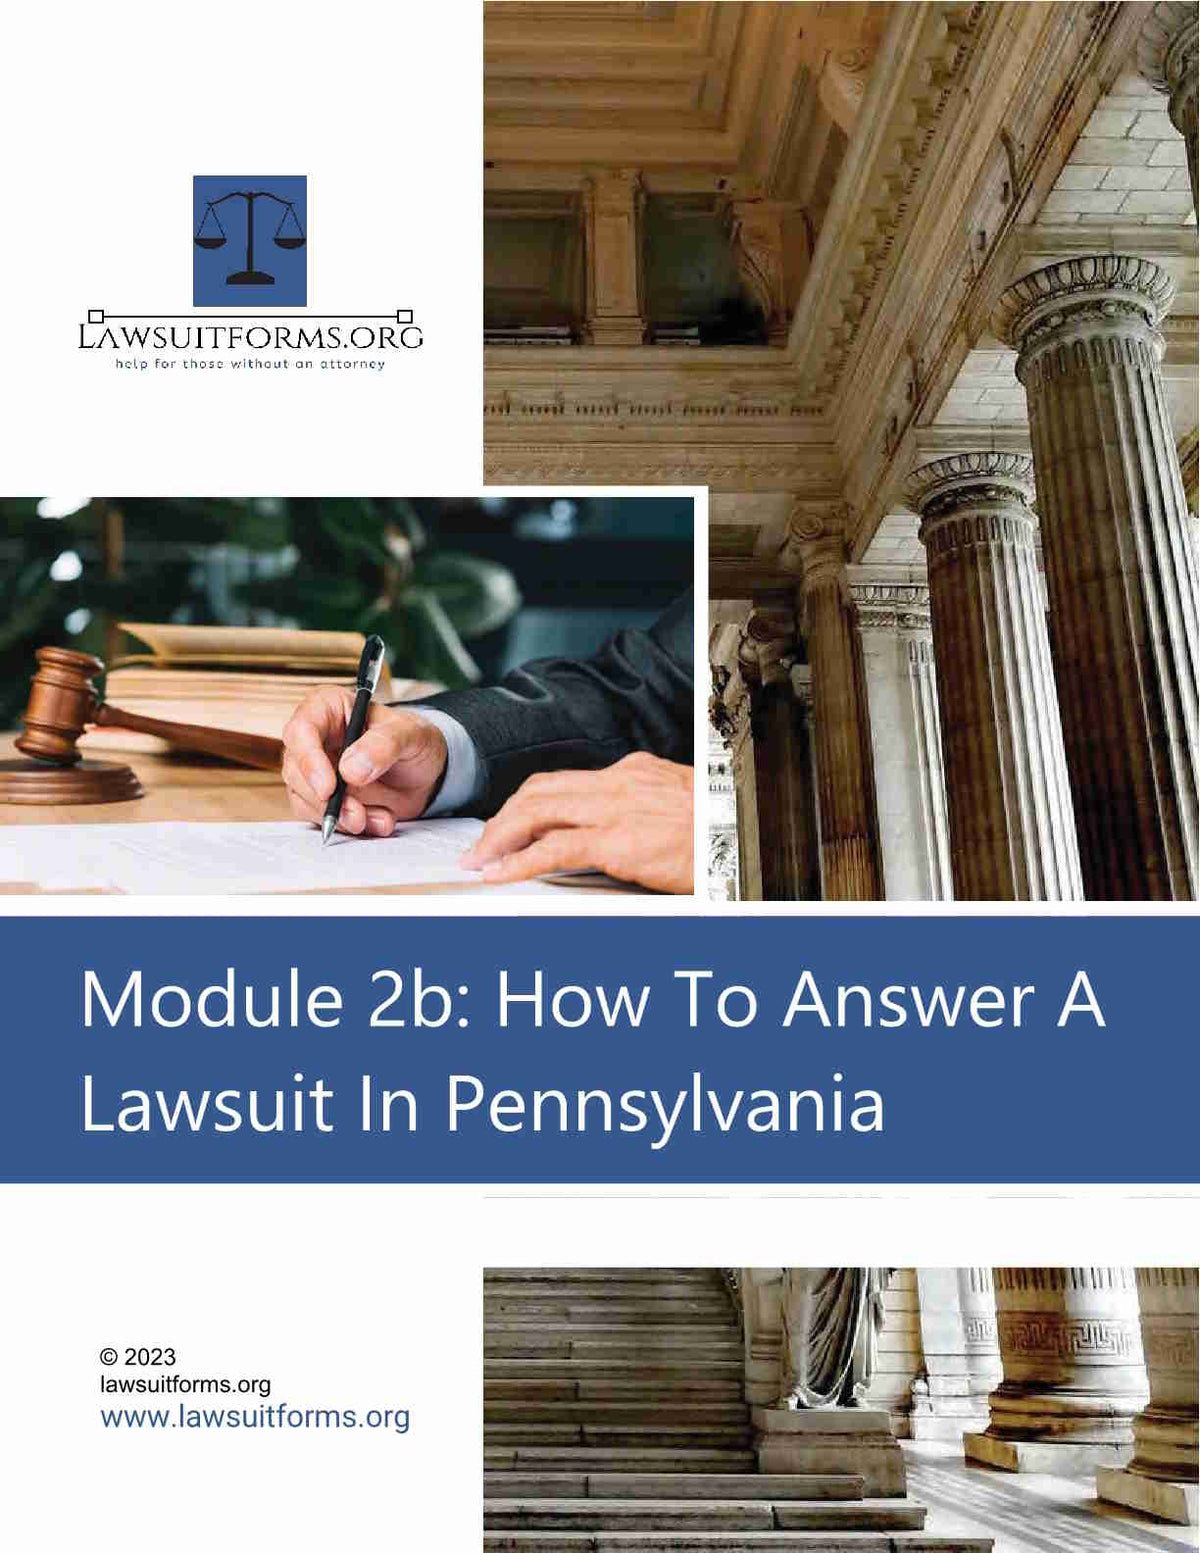 How to answer a lawsuit in Pennsylvania